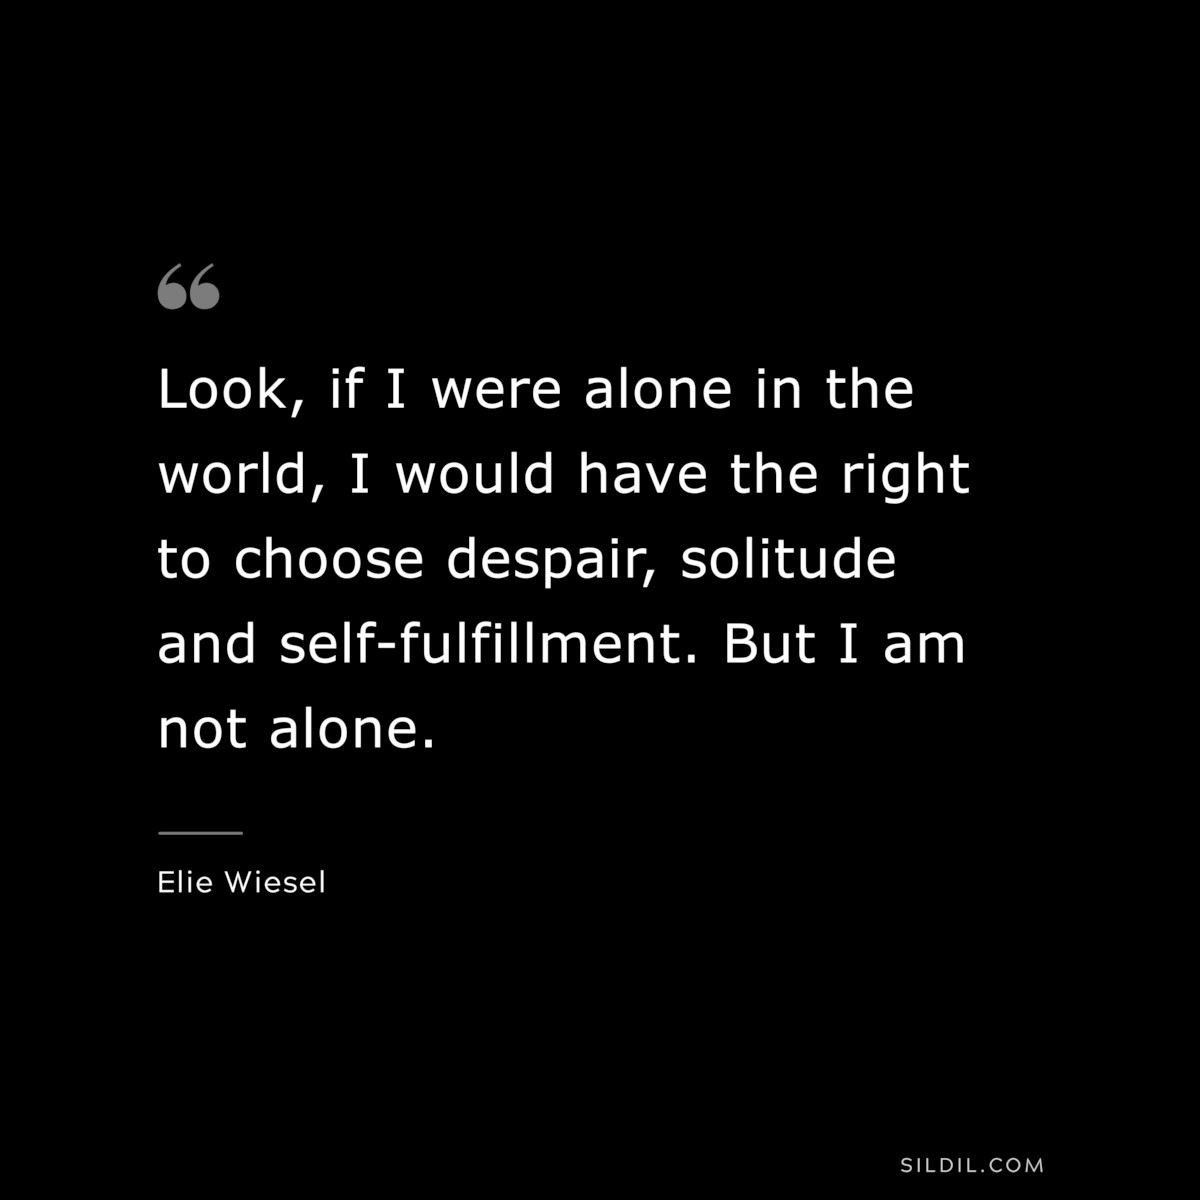 Look, if I were alone in the world, I would have the right to choose despair, solitude and self-fulfillment. But I am not alone. ― Elie Wiesel